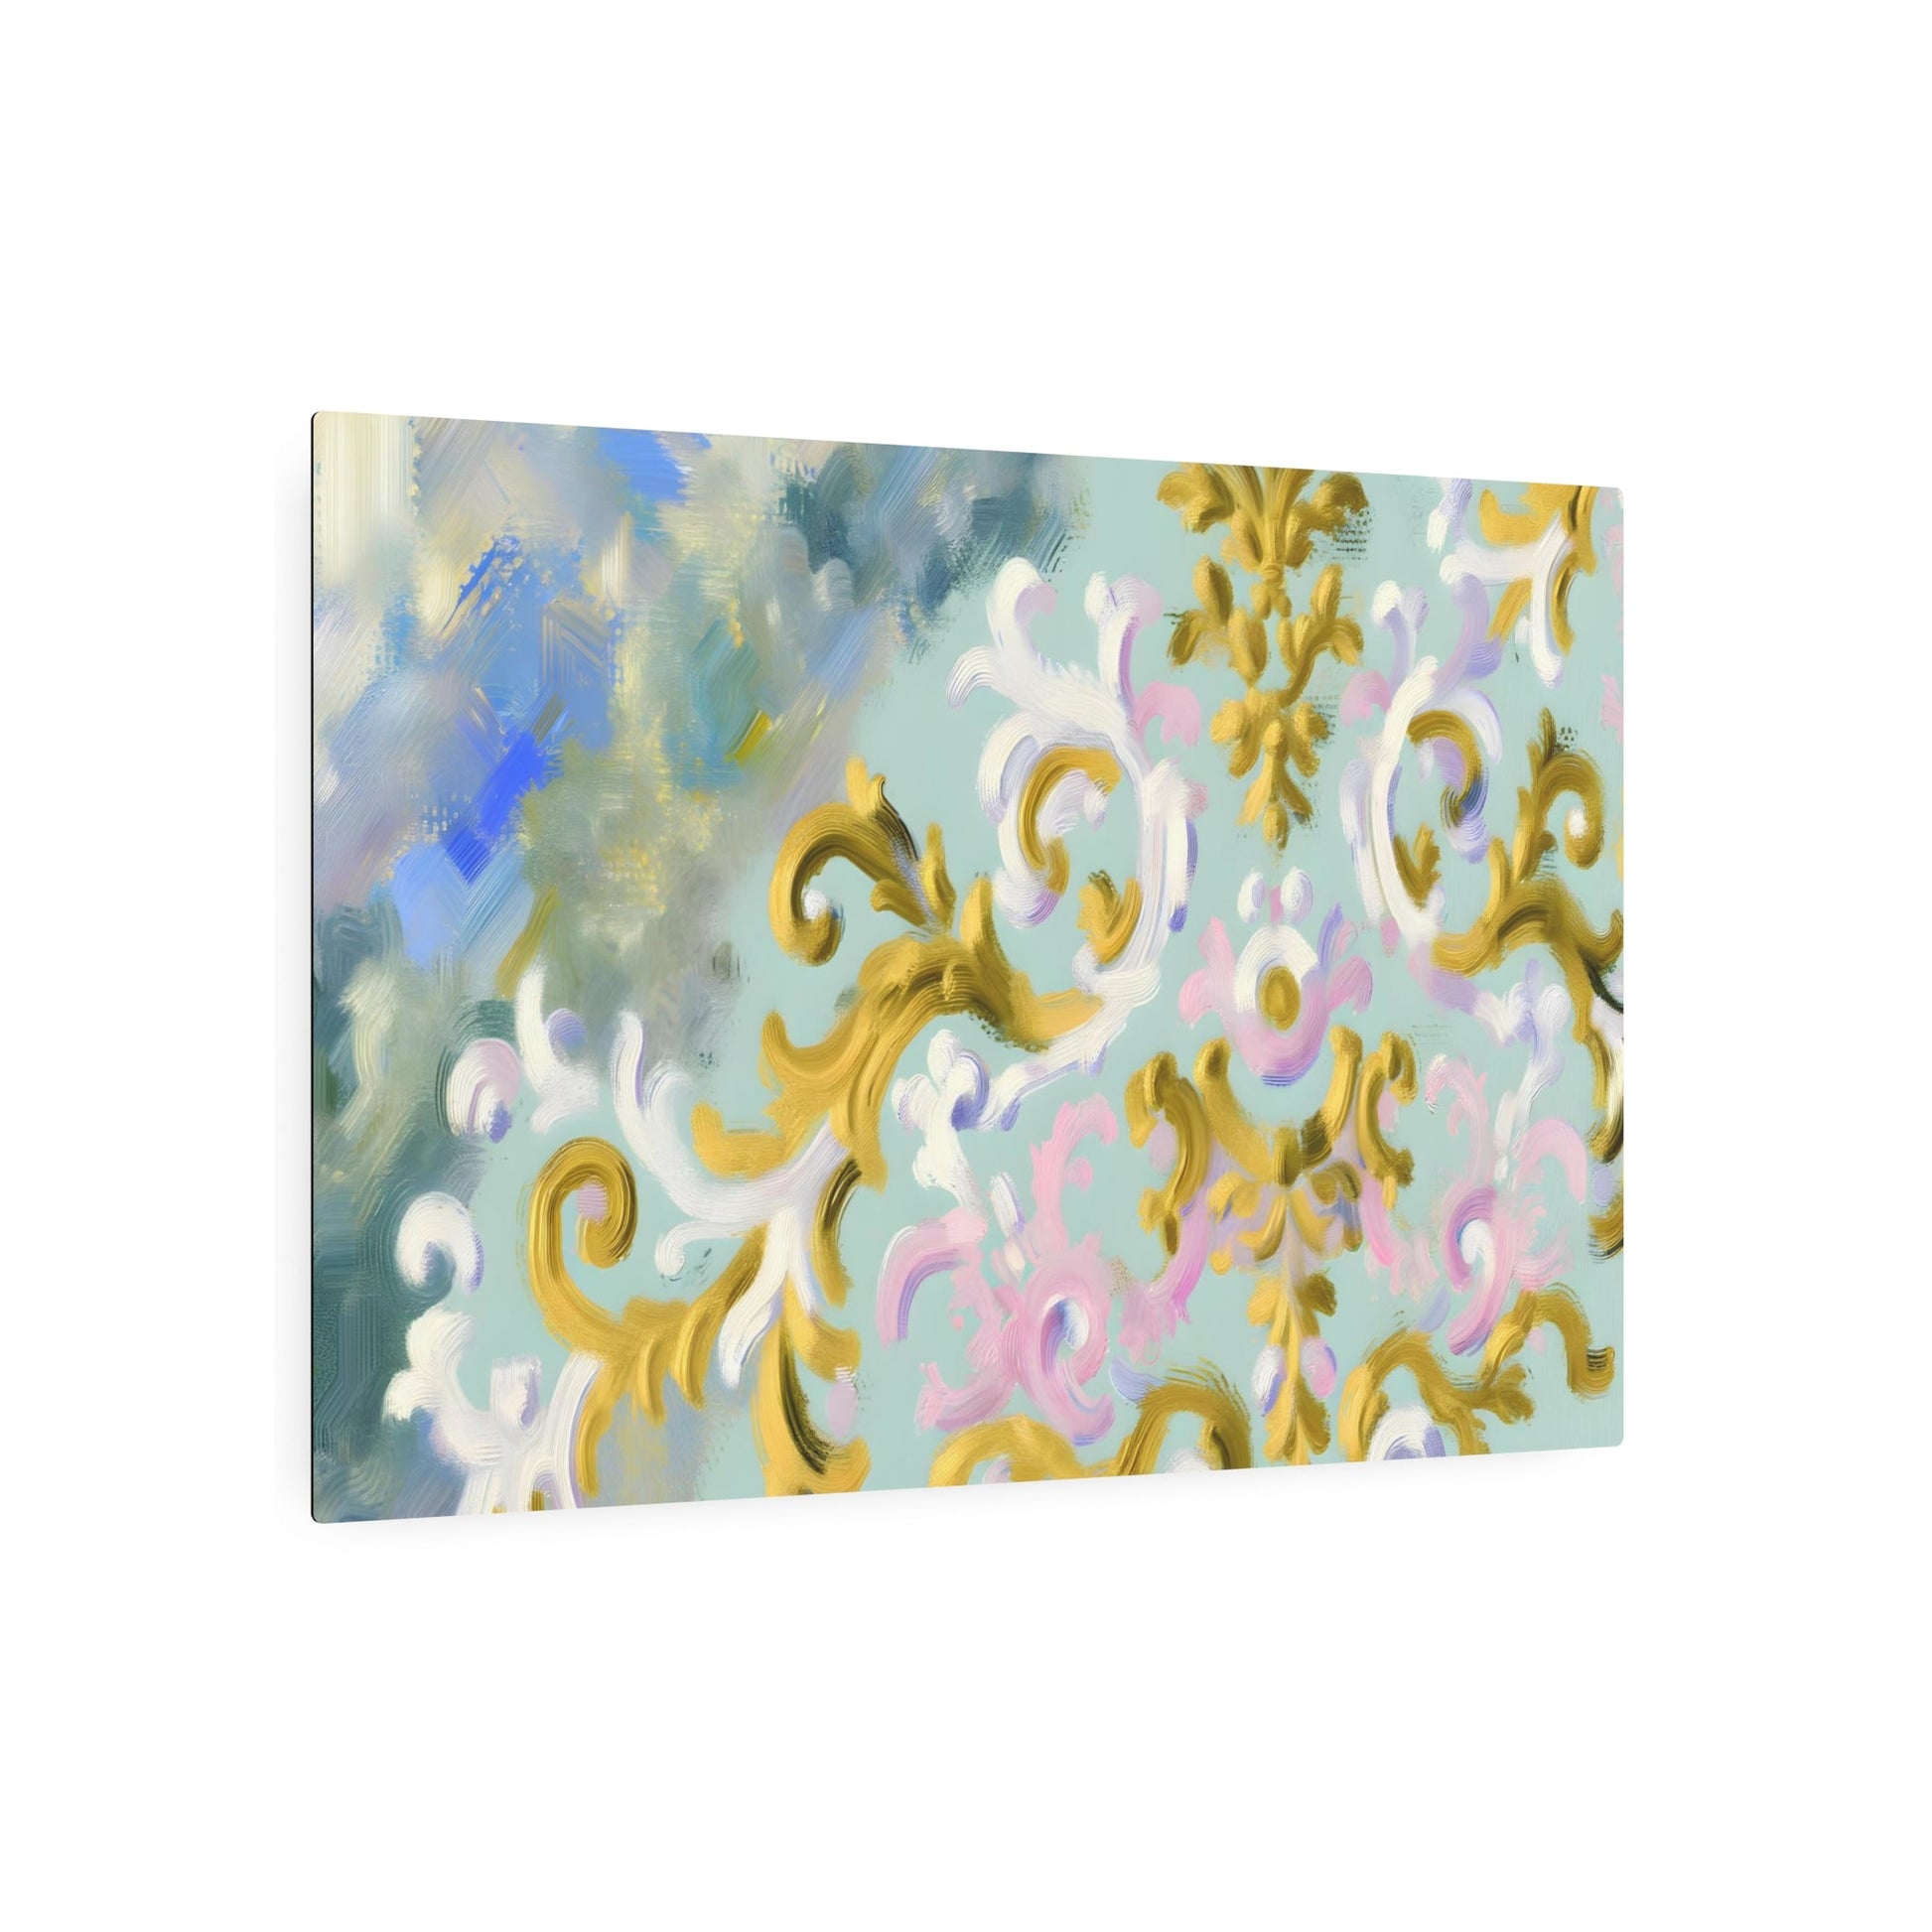 Metal Poster Art | "Rococo Inspired Artwork Featuring Pastel Colors & Gold Accents - Western Art Styles Collection, Evoking the Elegance of François B - Metal Poster Art 36″ x 24″ (Horizontal) 0.12''